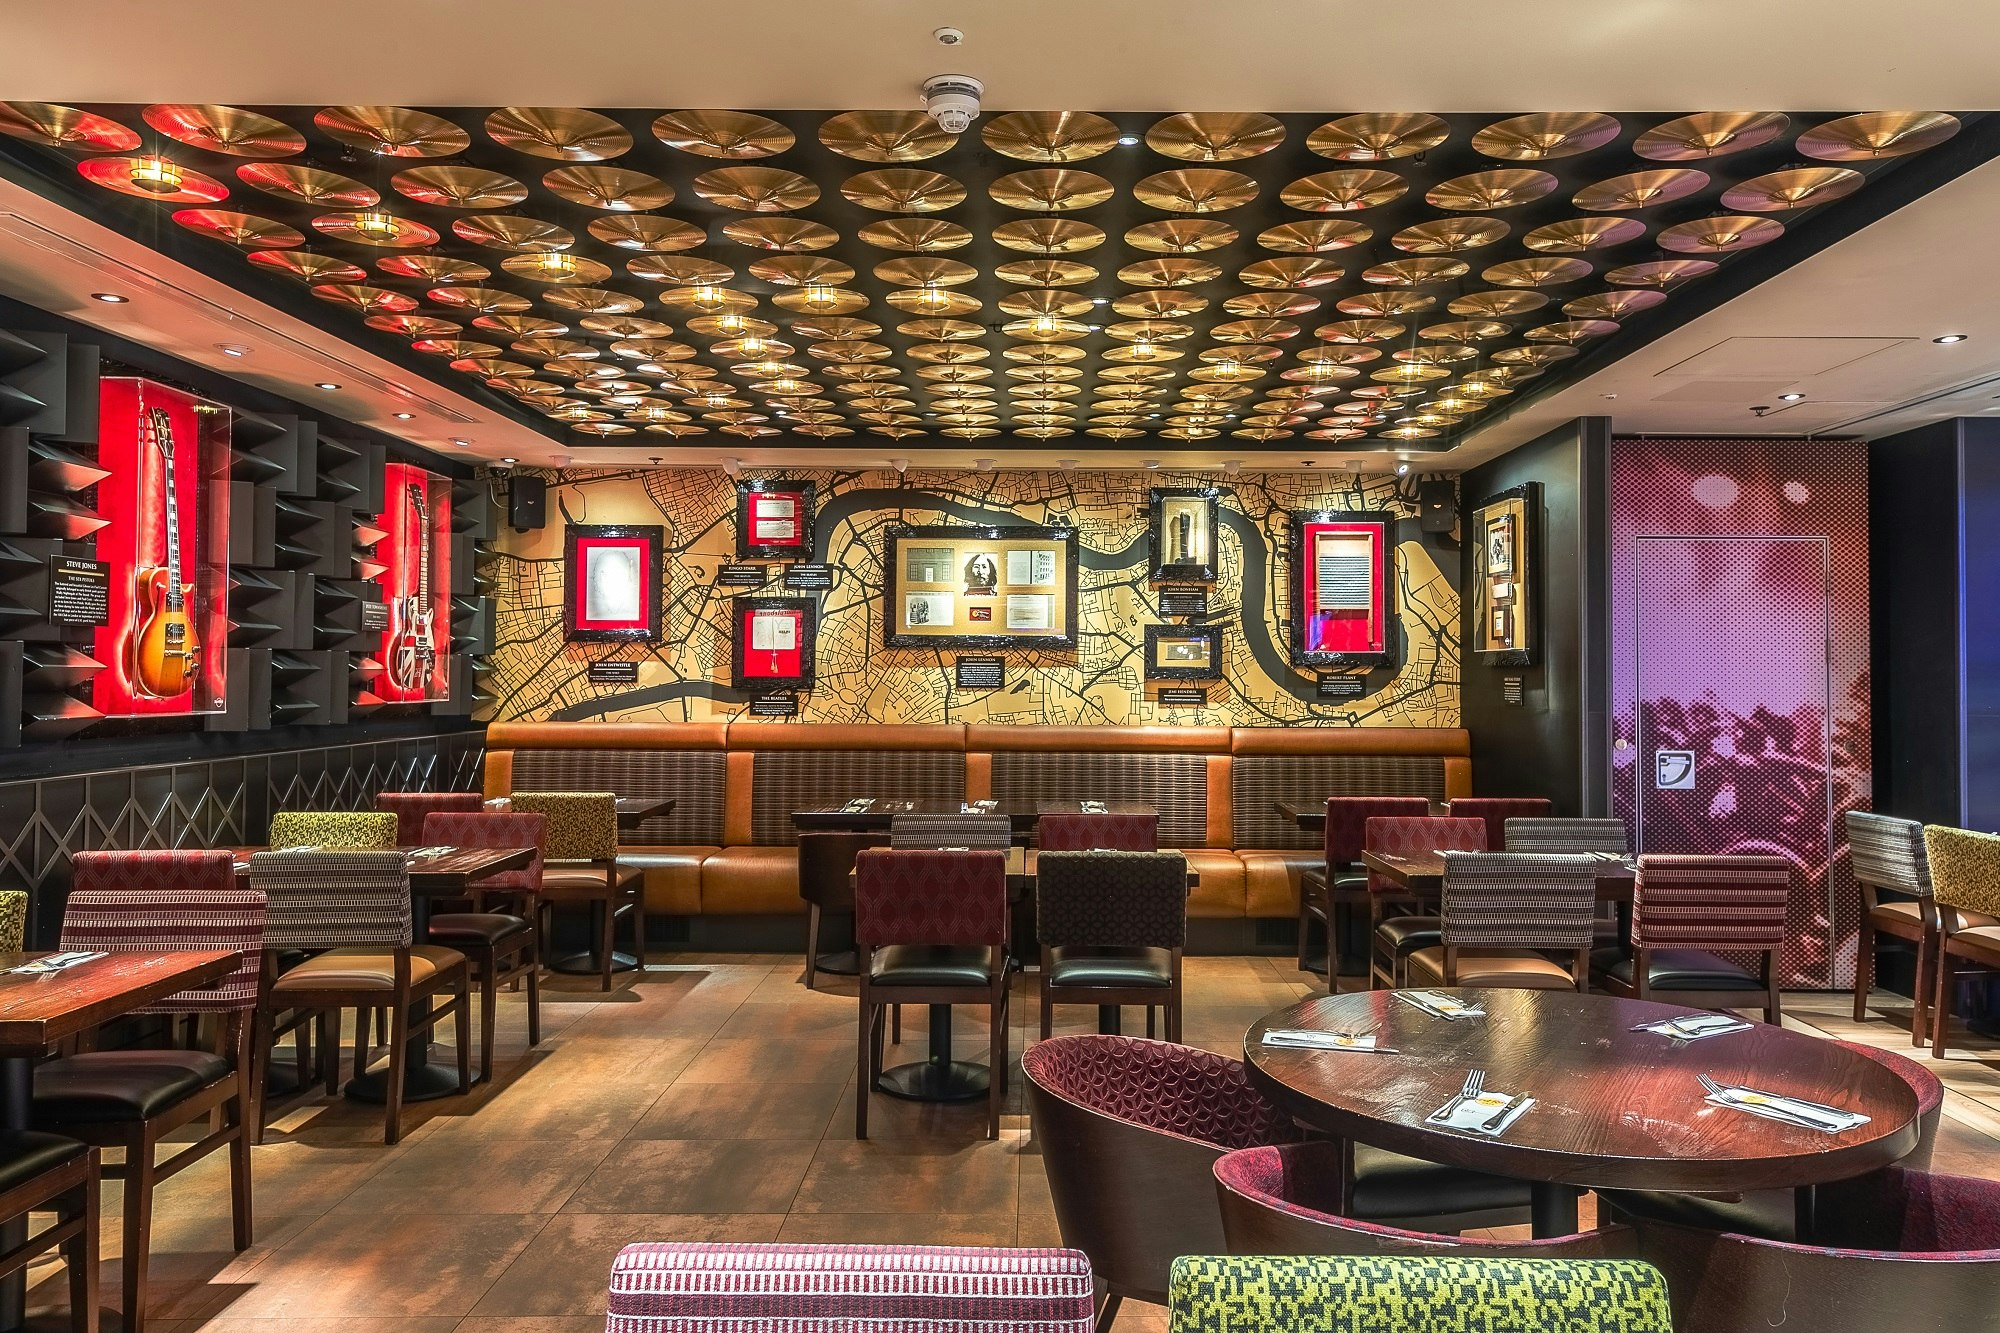 Hard Rock Cafe Piccadilly Circus - Legends Room image 4